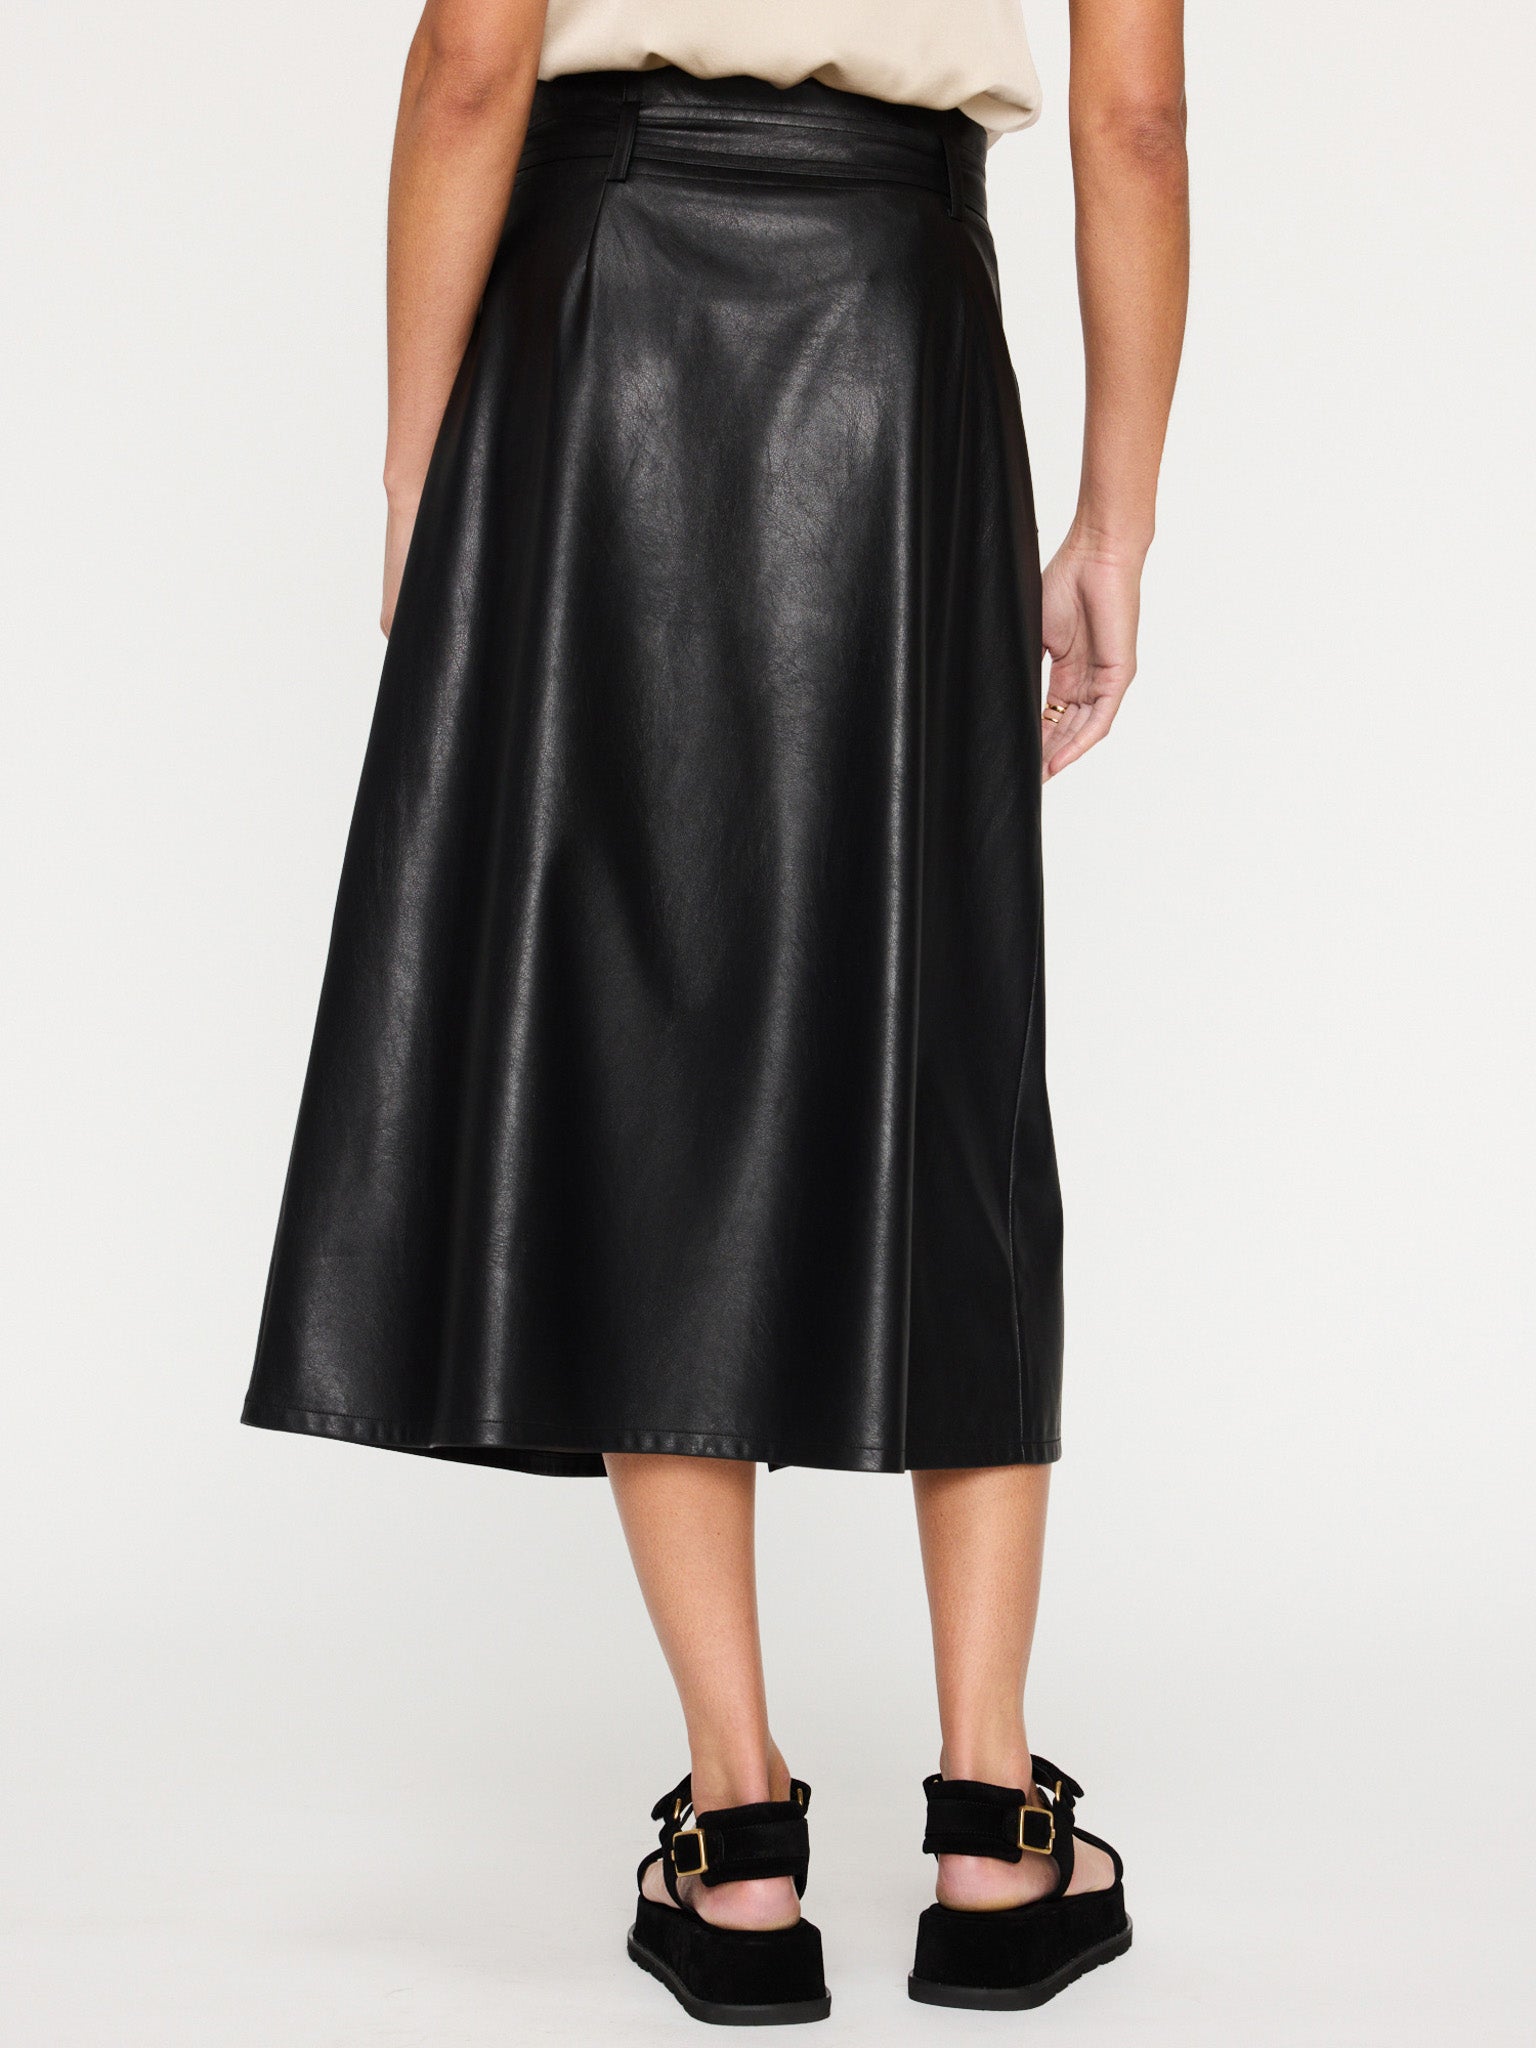 Teagan vegan leather black belted button front midi skirt back view